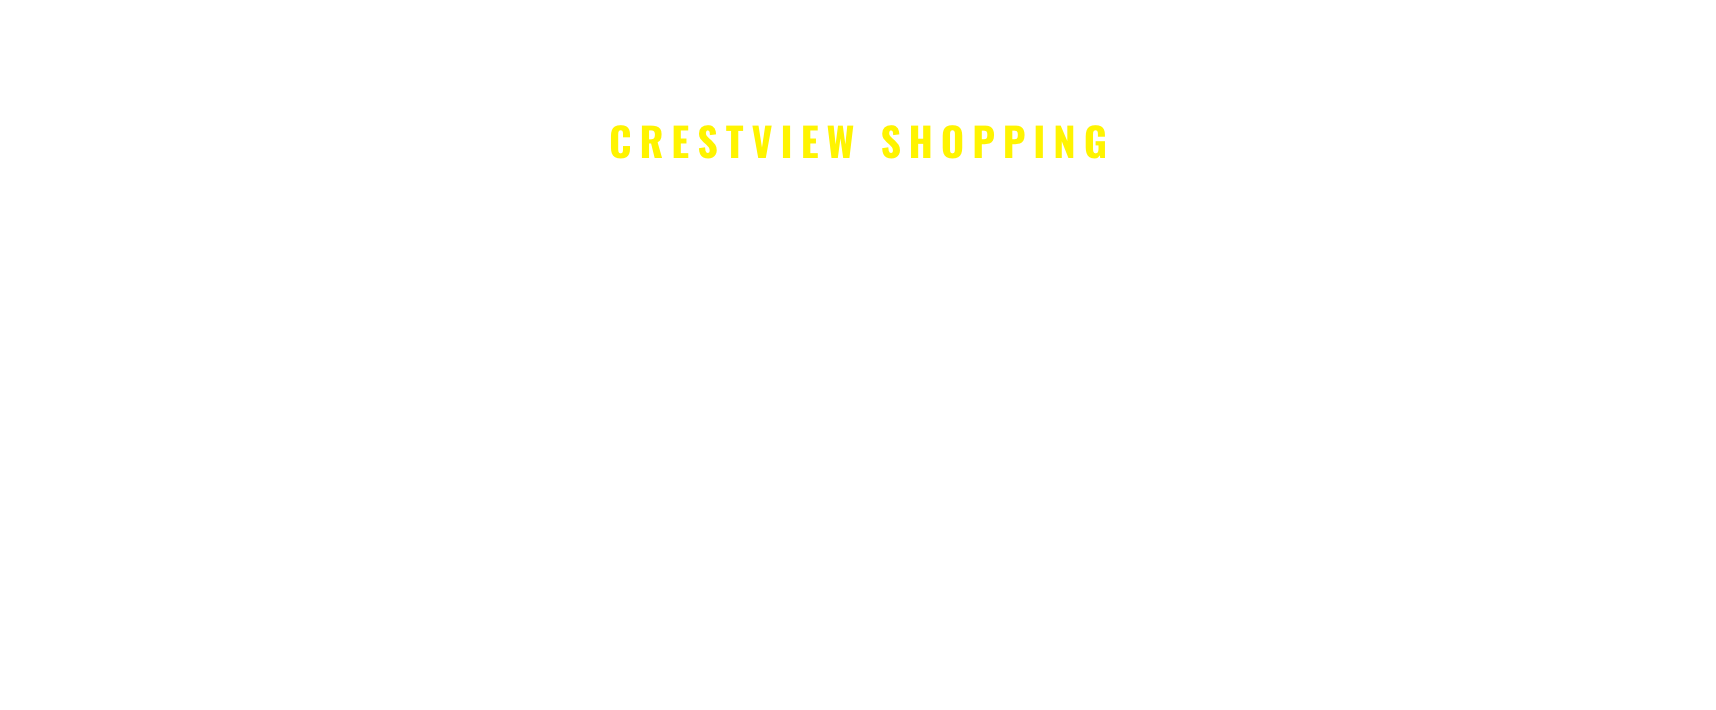 AMERICA'S BEST WINGS - Faster Takeout Order Now